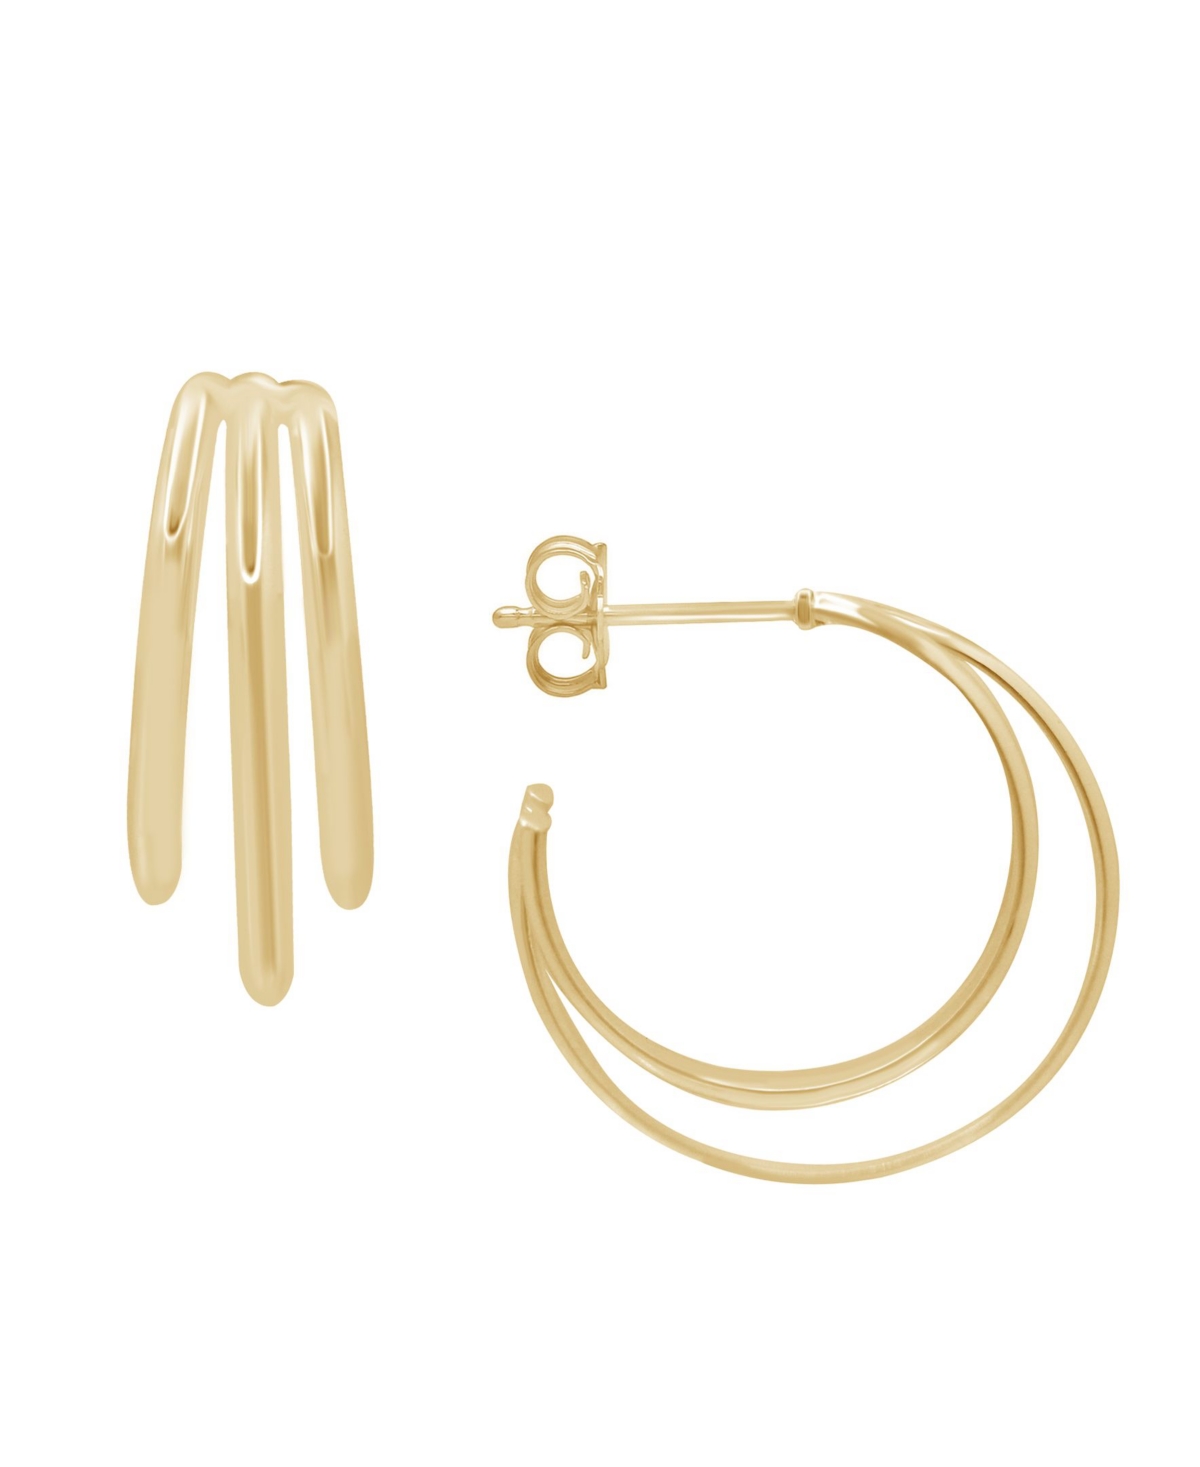 Gold Plated Multi Row C Hoop Post Earrings - Gold-Plated